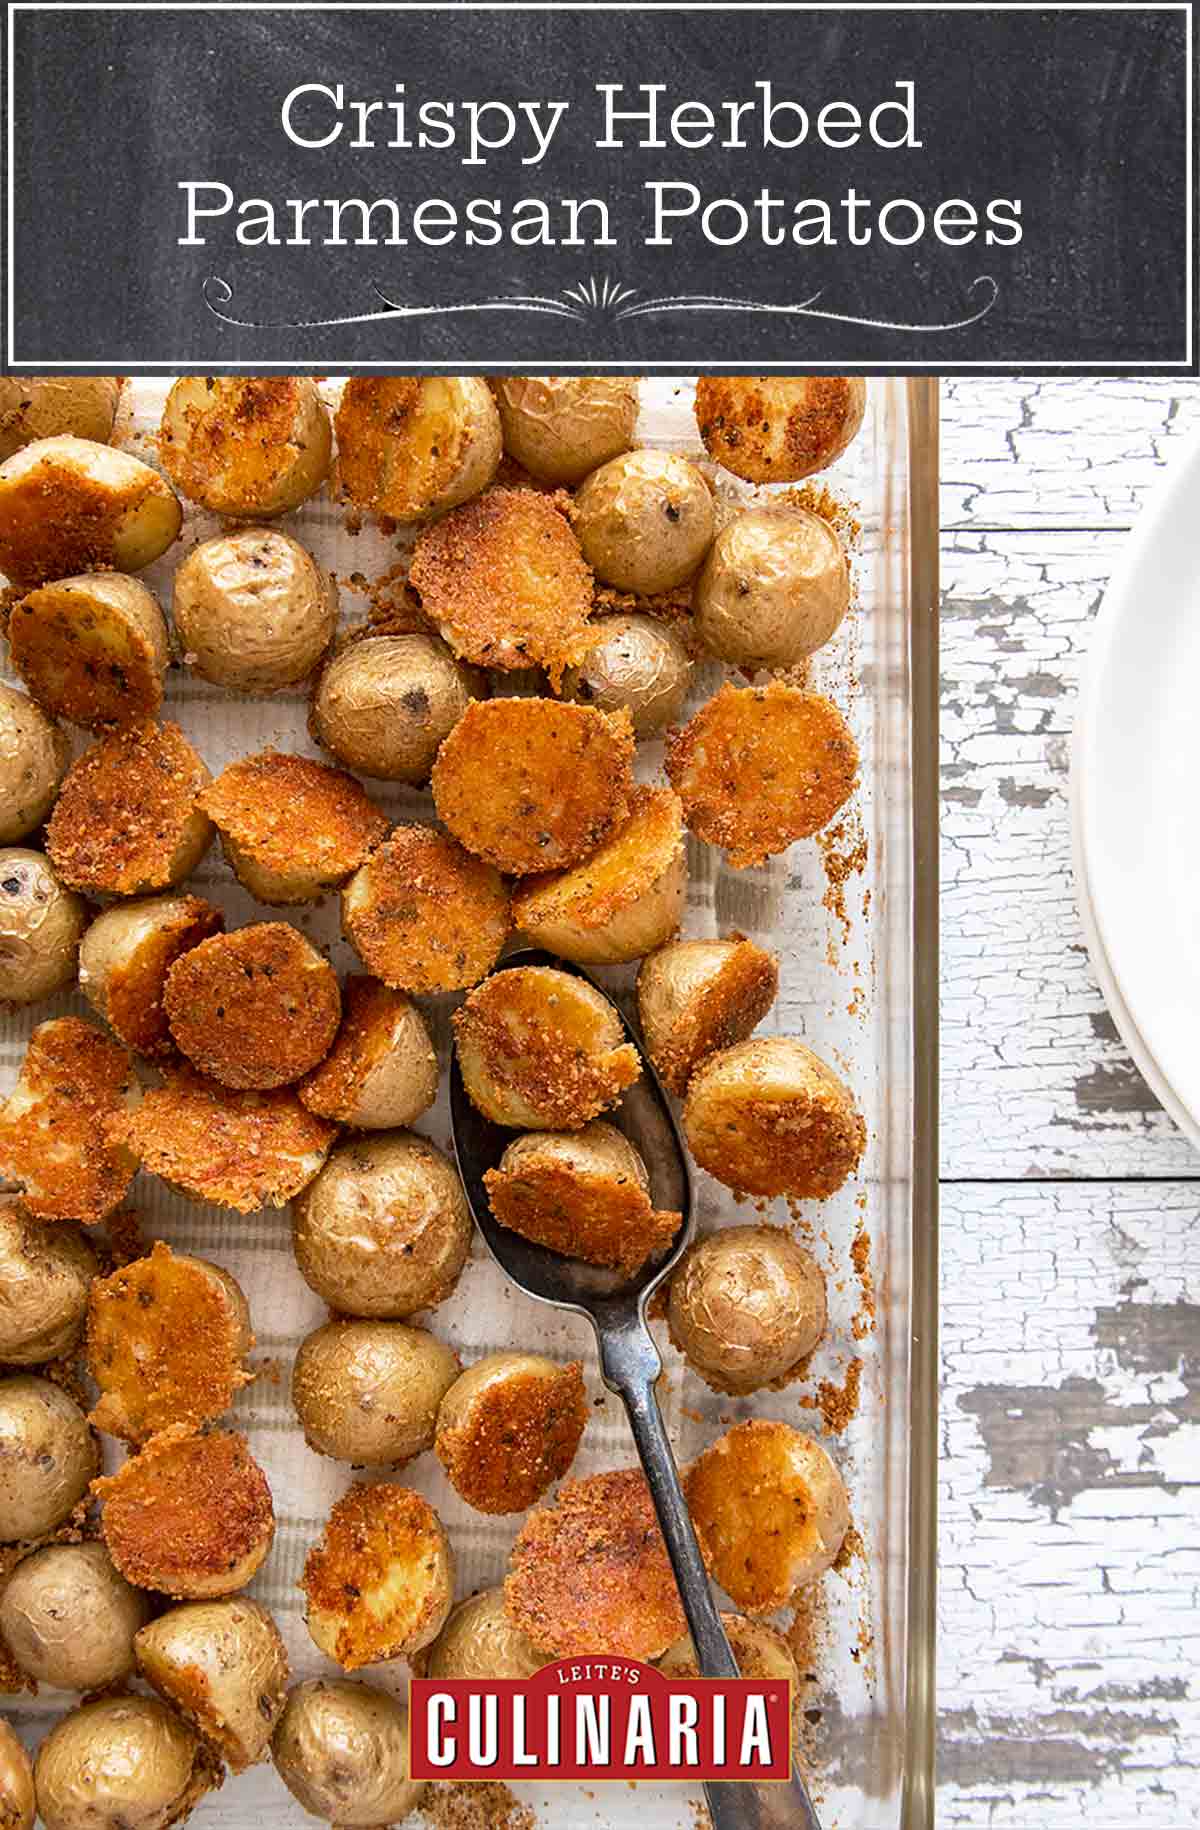 Crispy Parmesan potatoes in a glass baking dish on a white wooden background.